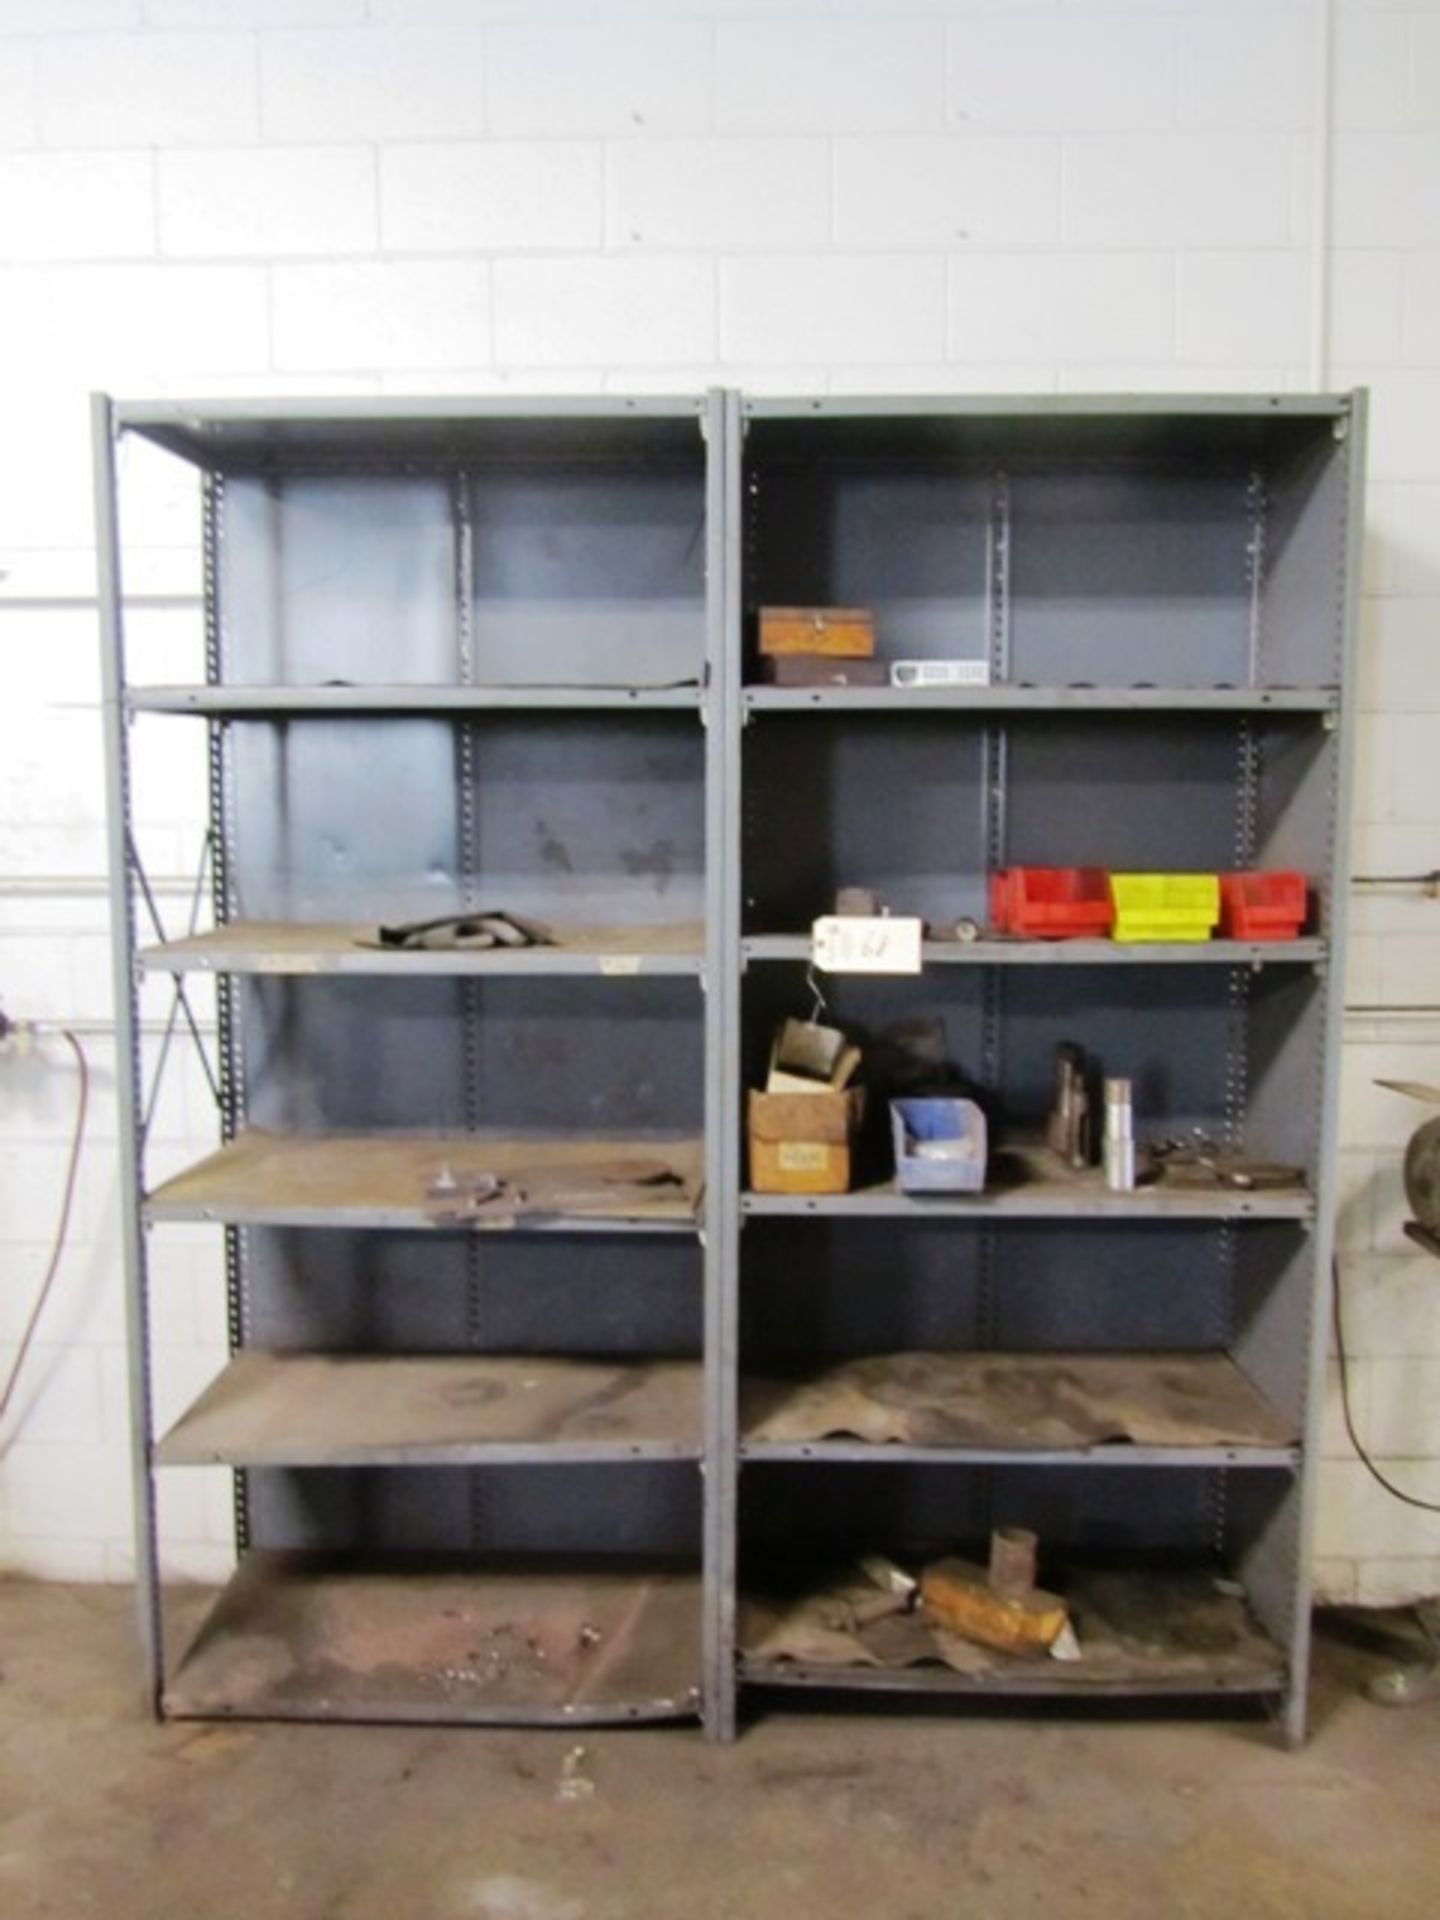 2 Sections of Steel Shelving